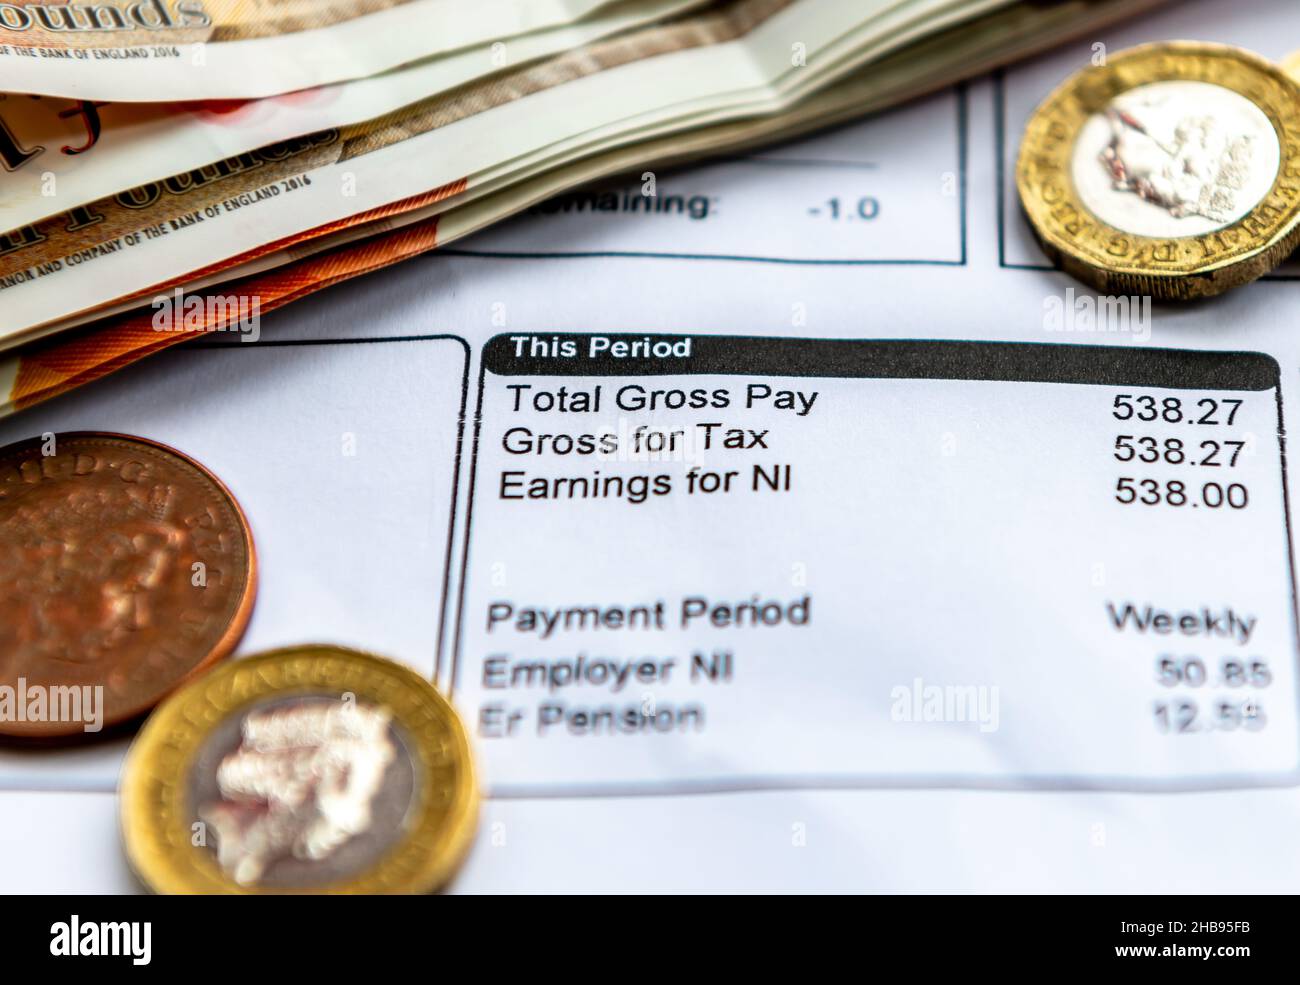 A payslip showing pay as you earn tax deductions, national insurance and pension contributions with some bank notes and coins. Stock Photo